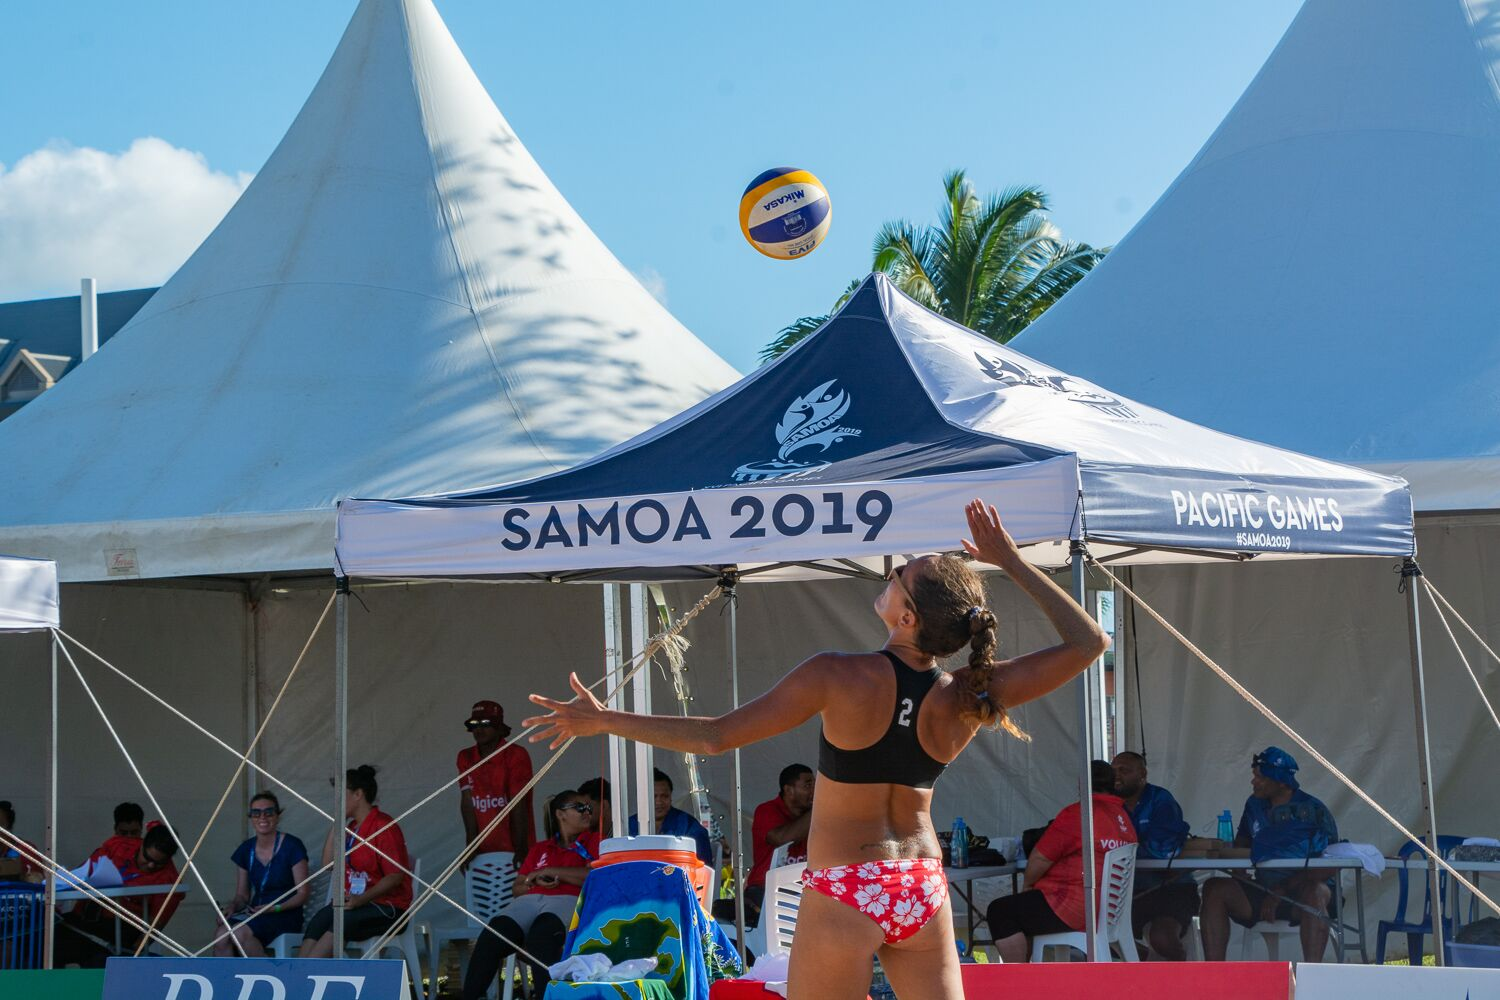 insidethegames is reporting LIVE from the 2019 Pacific Games in Samoa